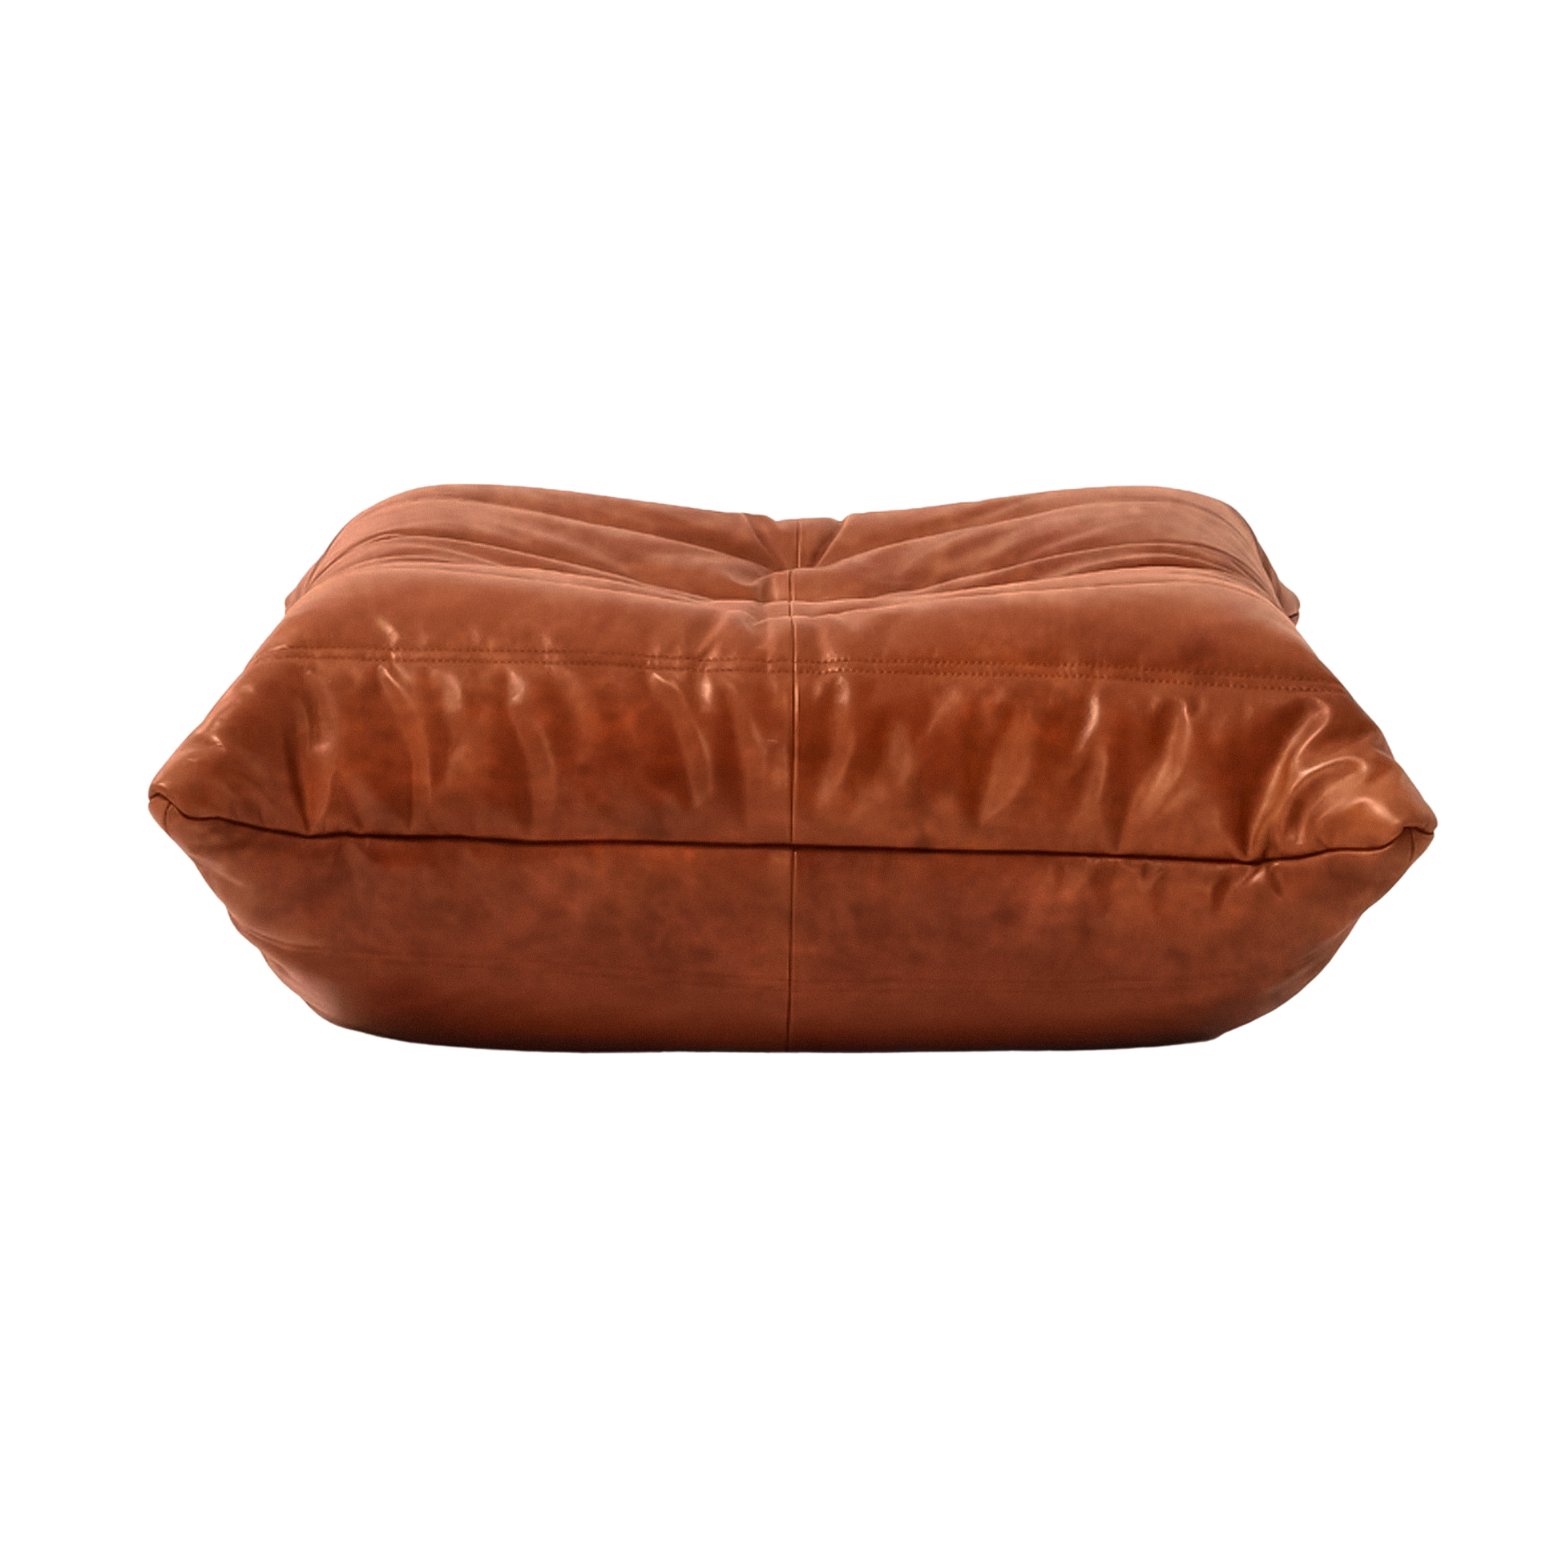 Original brown leather Togo seating group by Michel Ducaroy for